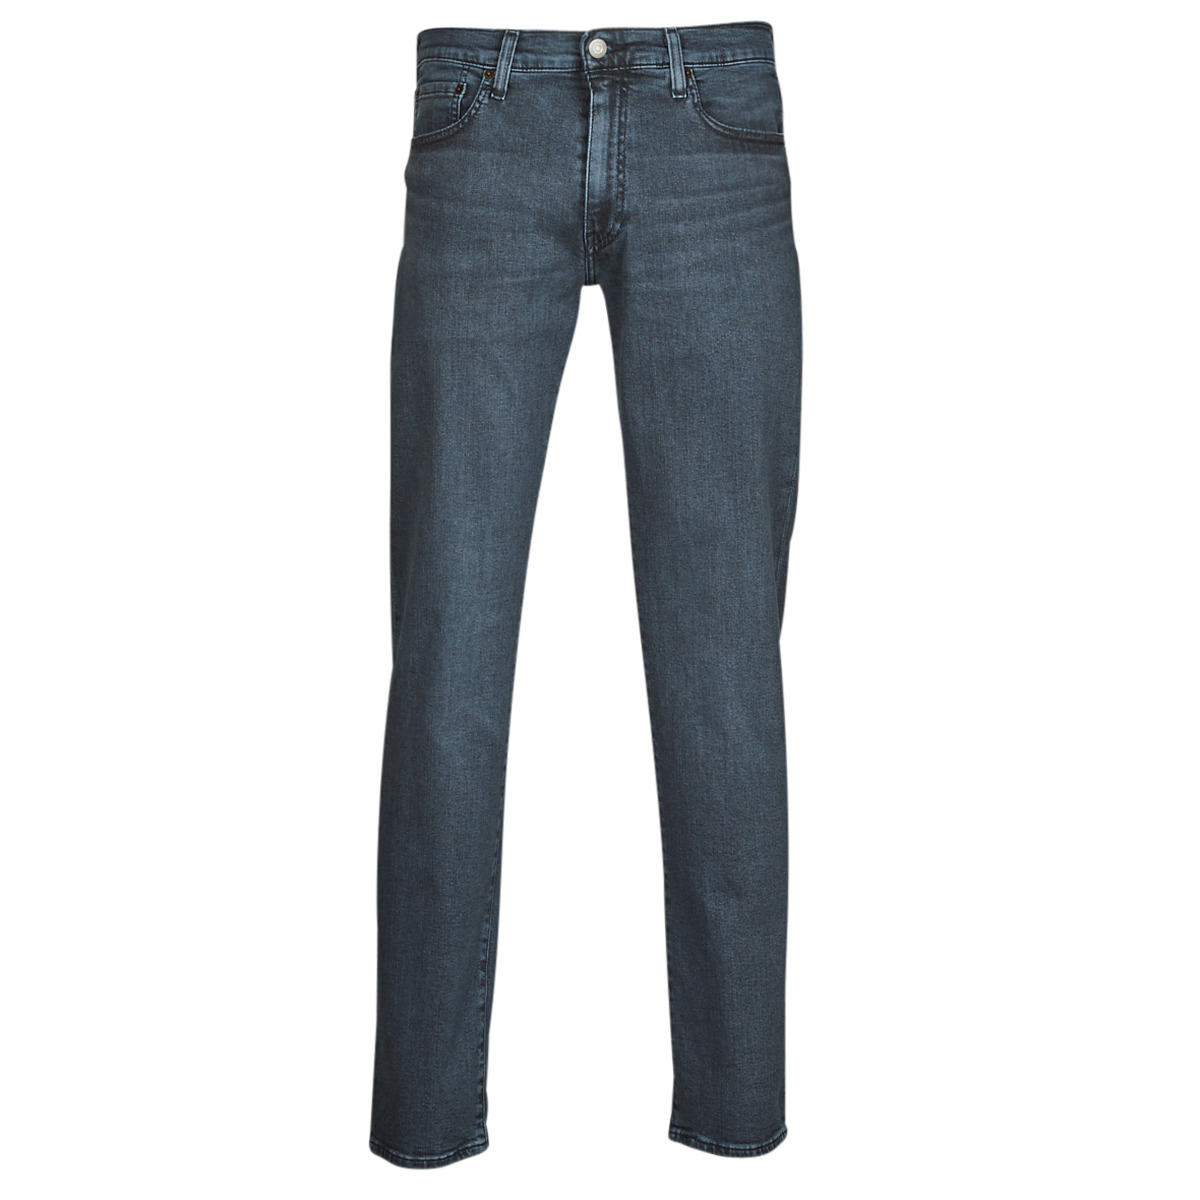 Levi's Blue Skinny Jeans for Man at Spartoo GOOFASH